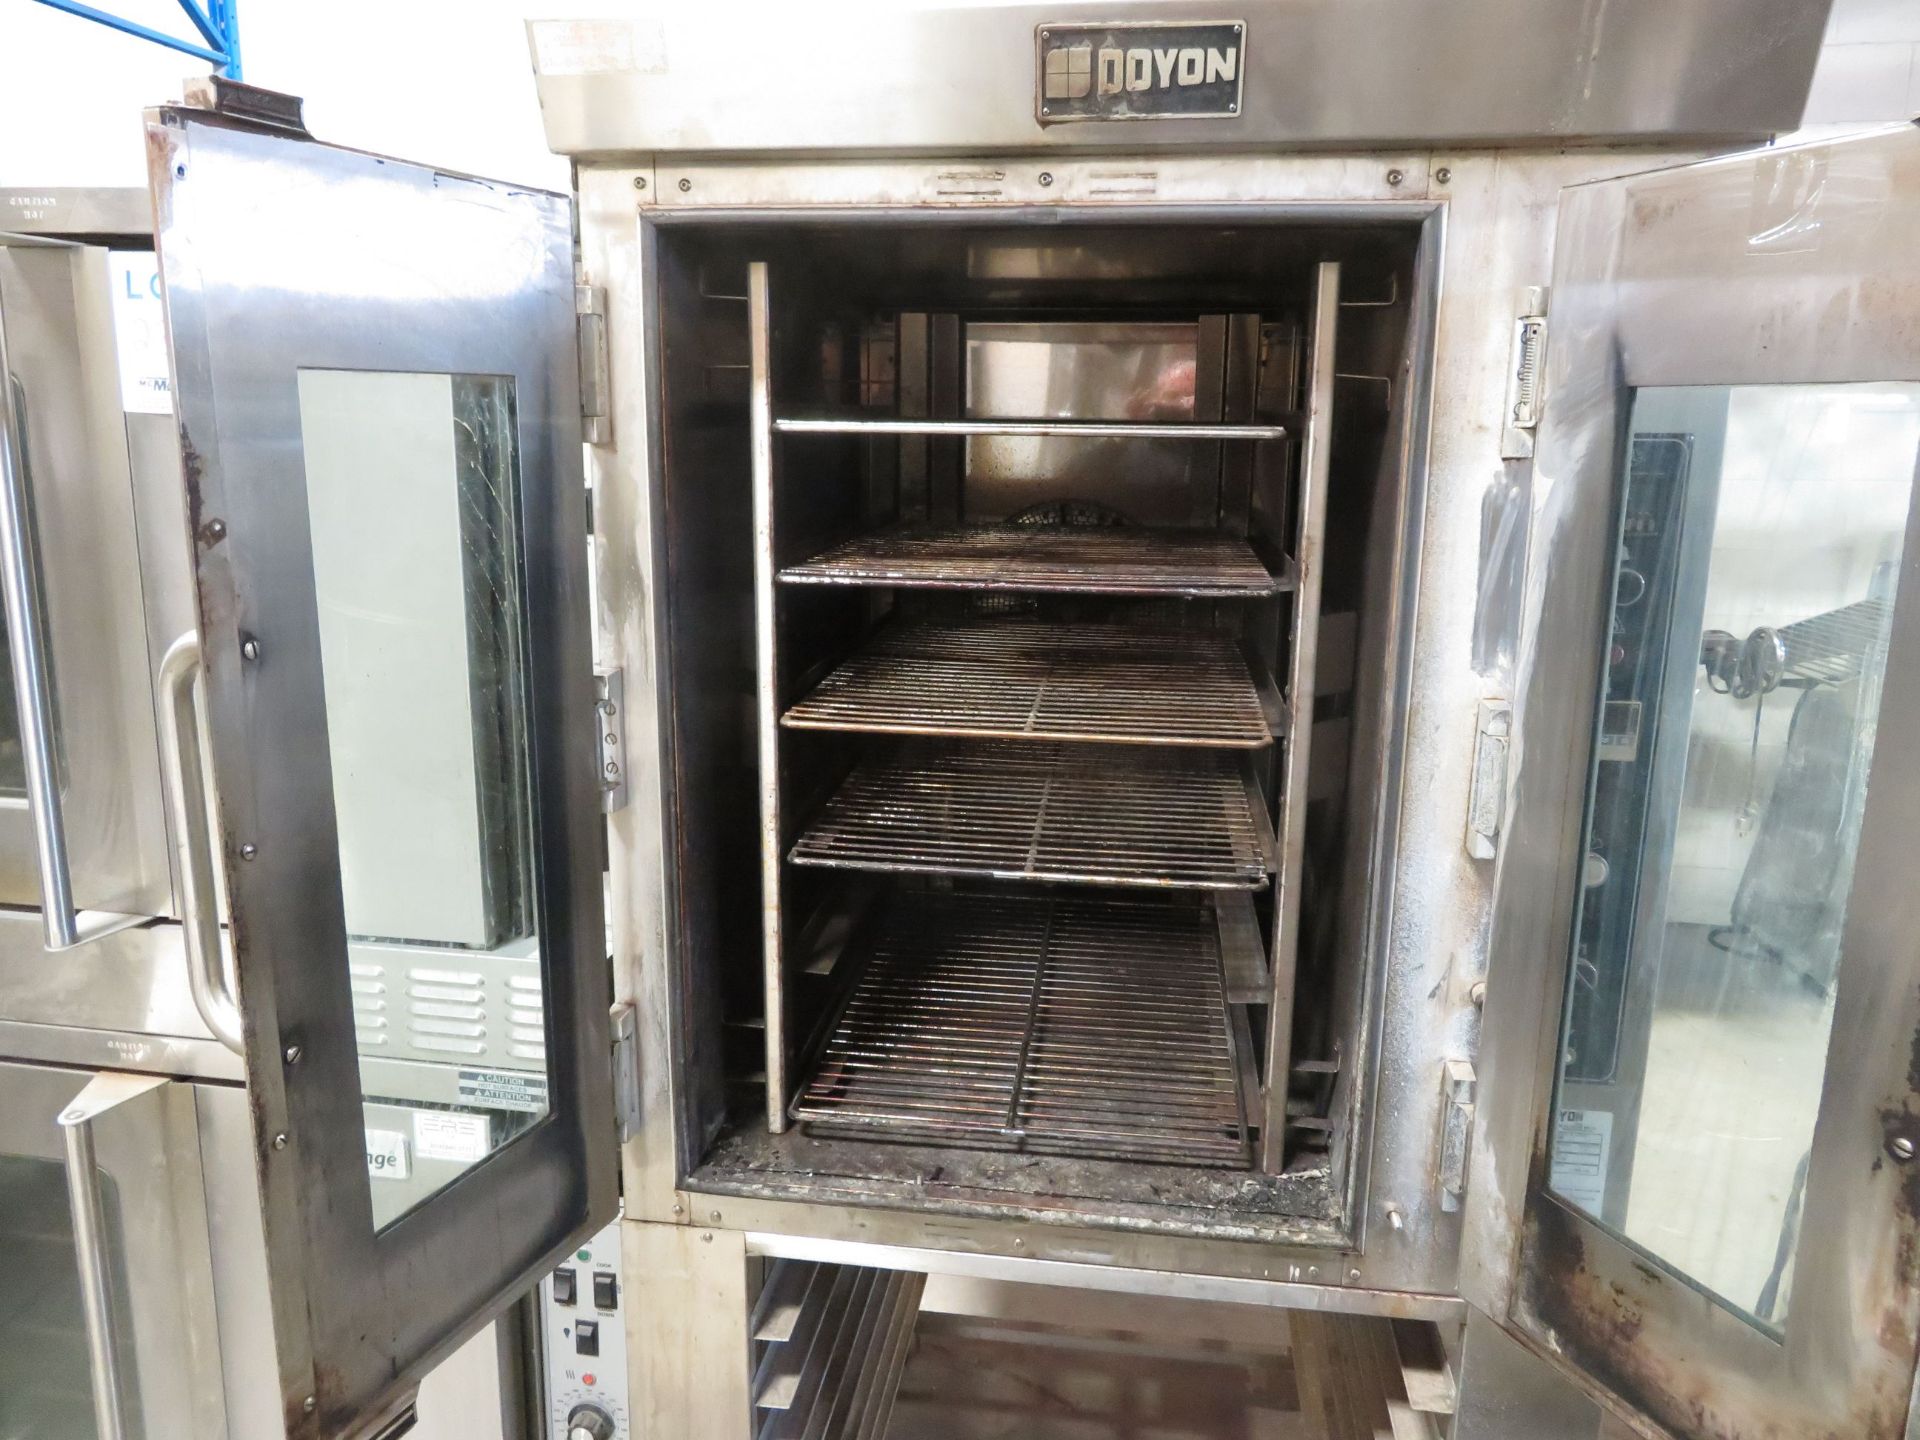 DOYON convection oven #JA8, 120/208 volt, 3 phase, approx. 37"w x 56"d x 74"h - Image 5 of 6